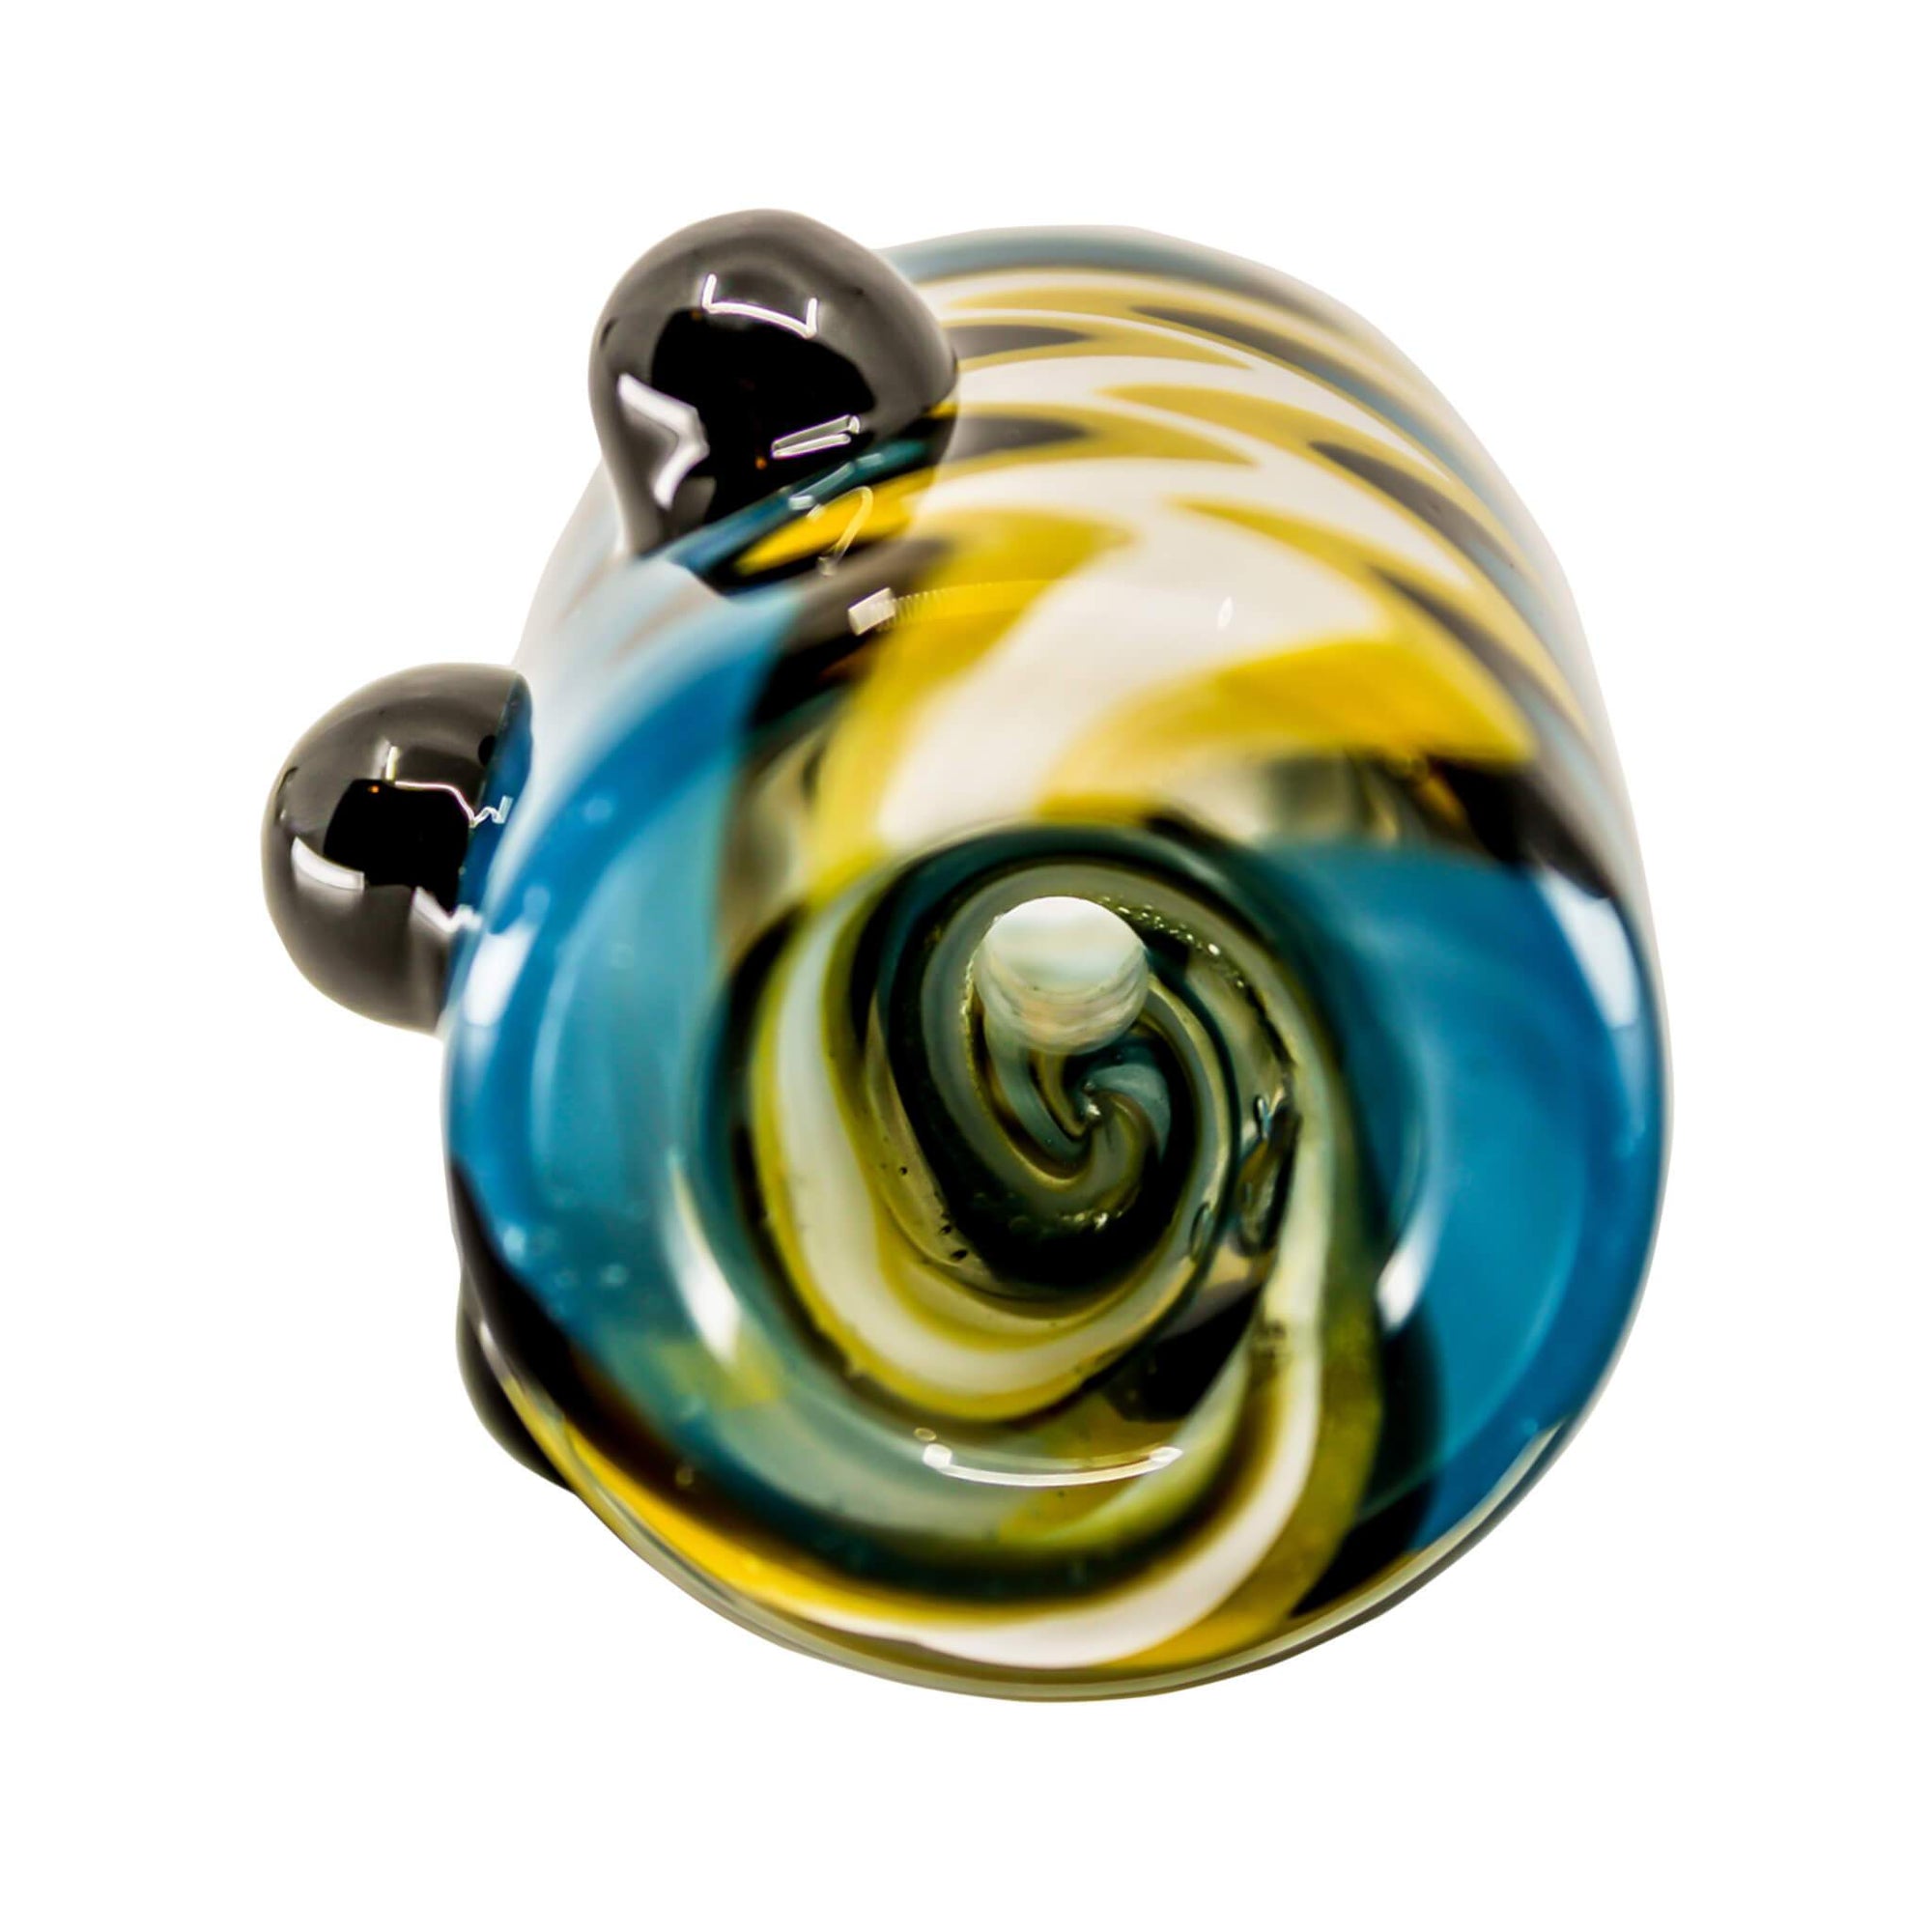 Wavy Mug Flower Bowl | All Four Variations Image | the dabbing specialists